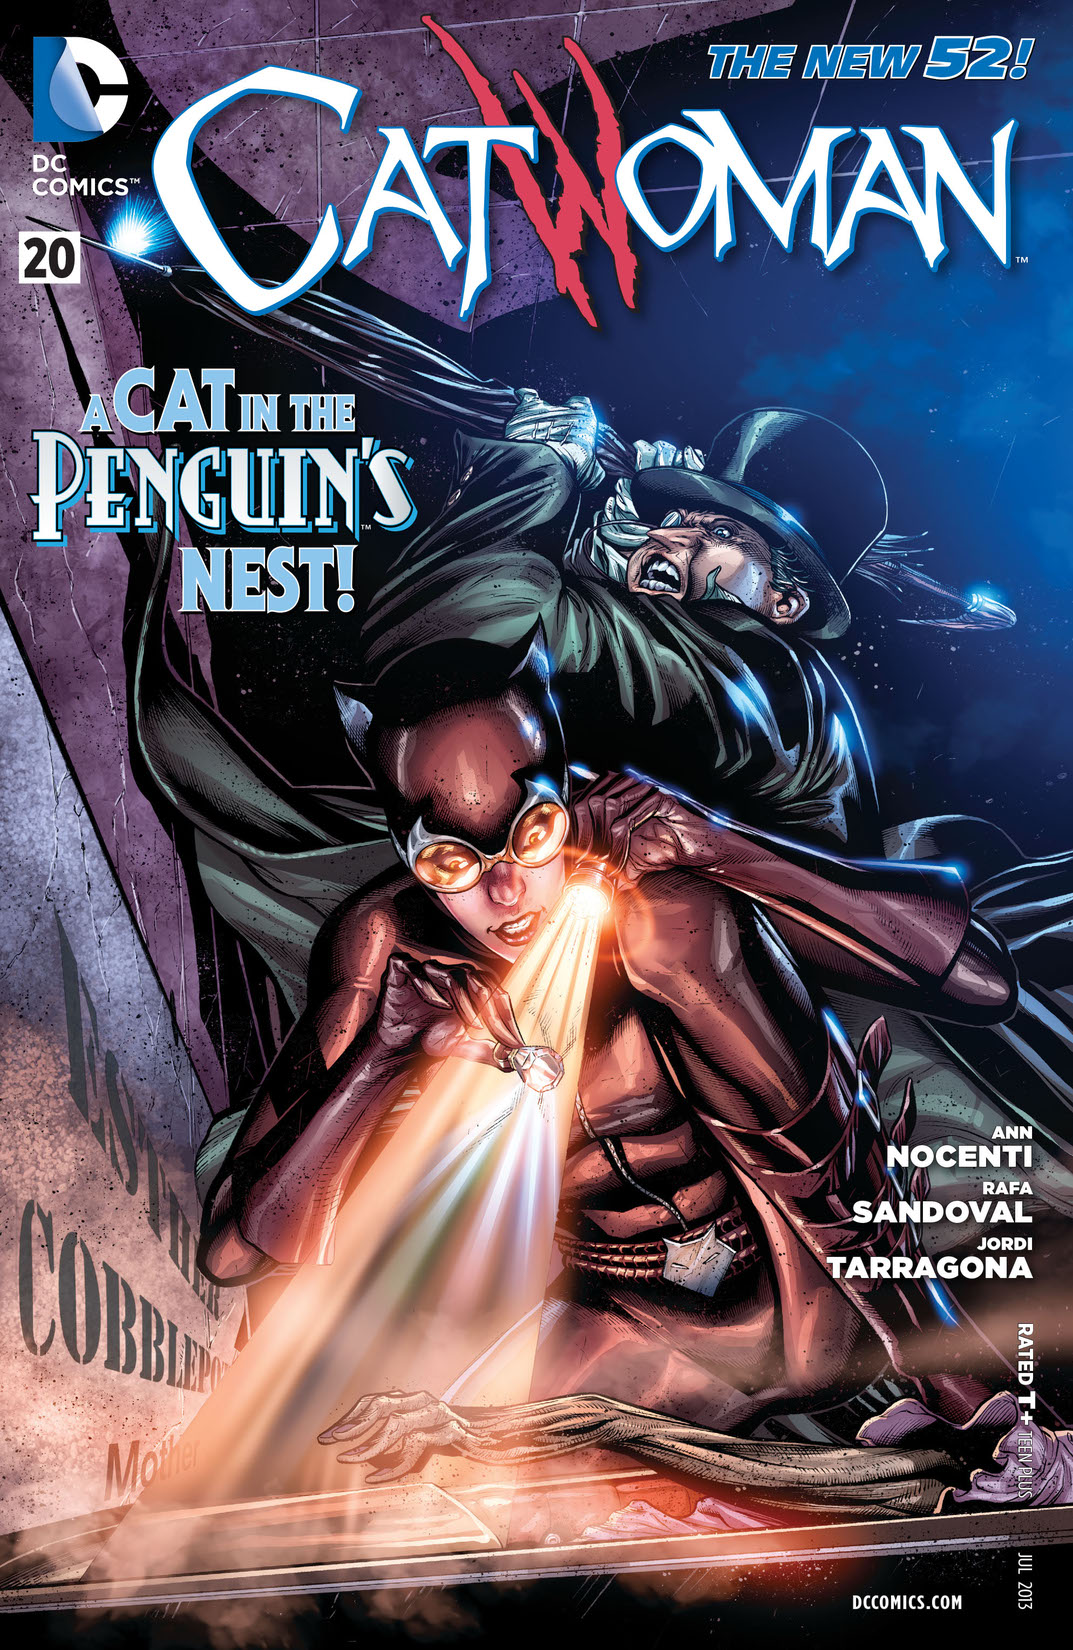 Catwoman (2011-) #20 preview images